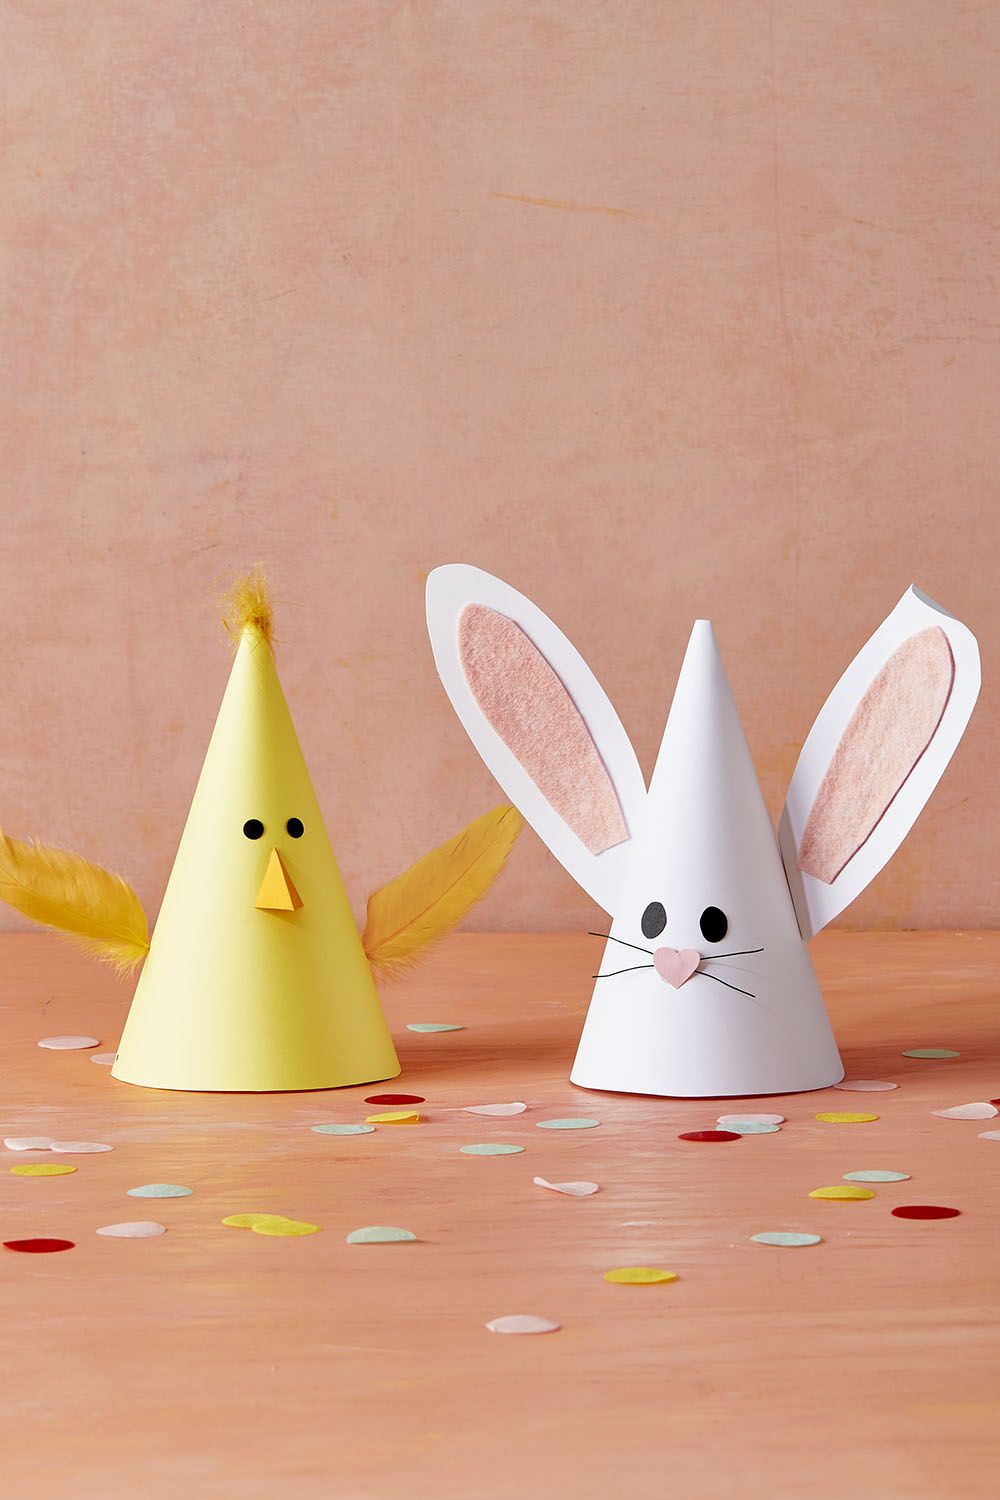 15 Cool Easter Crafts for Teens to Make